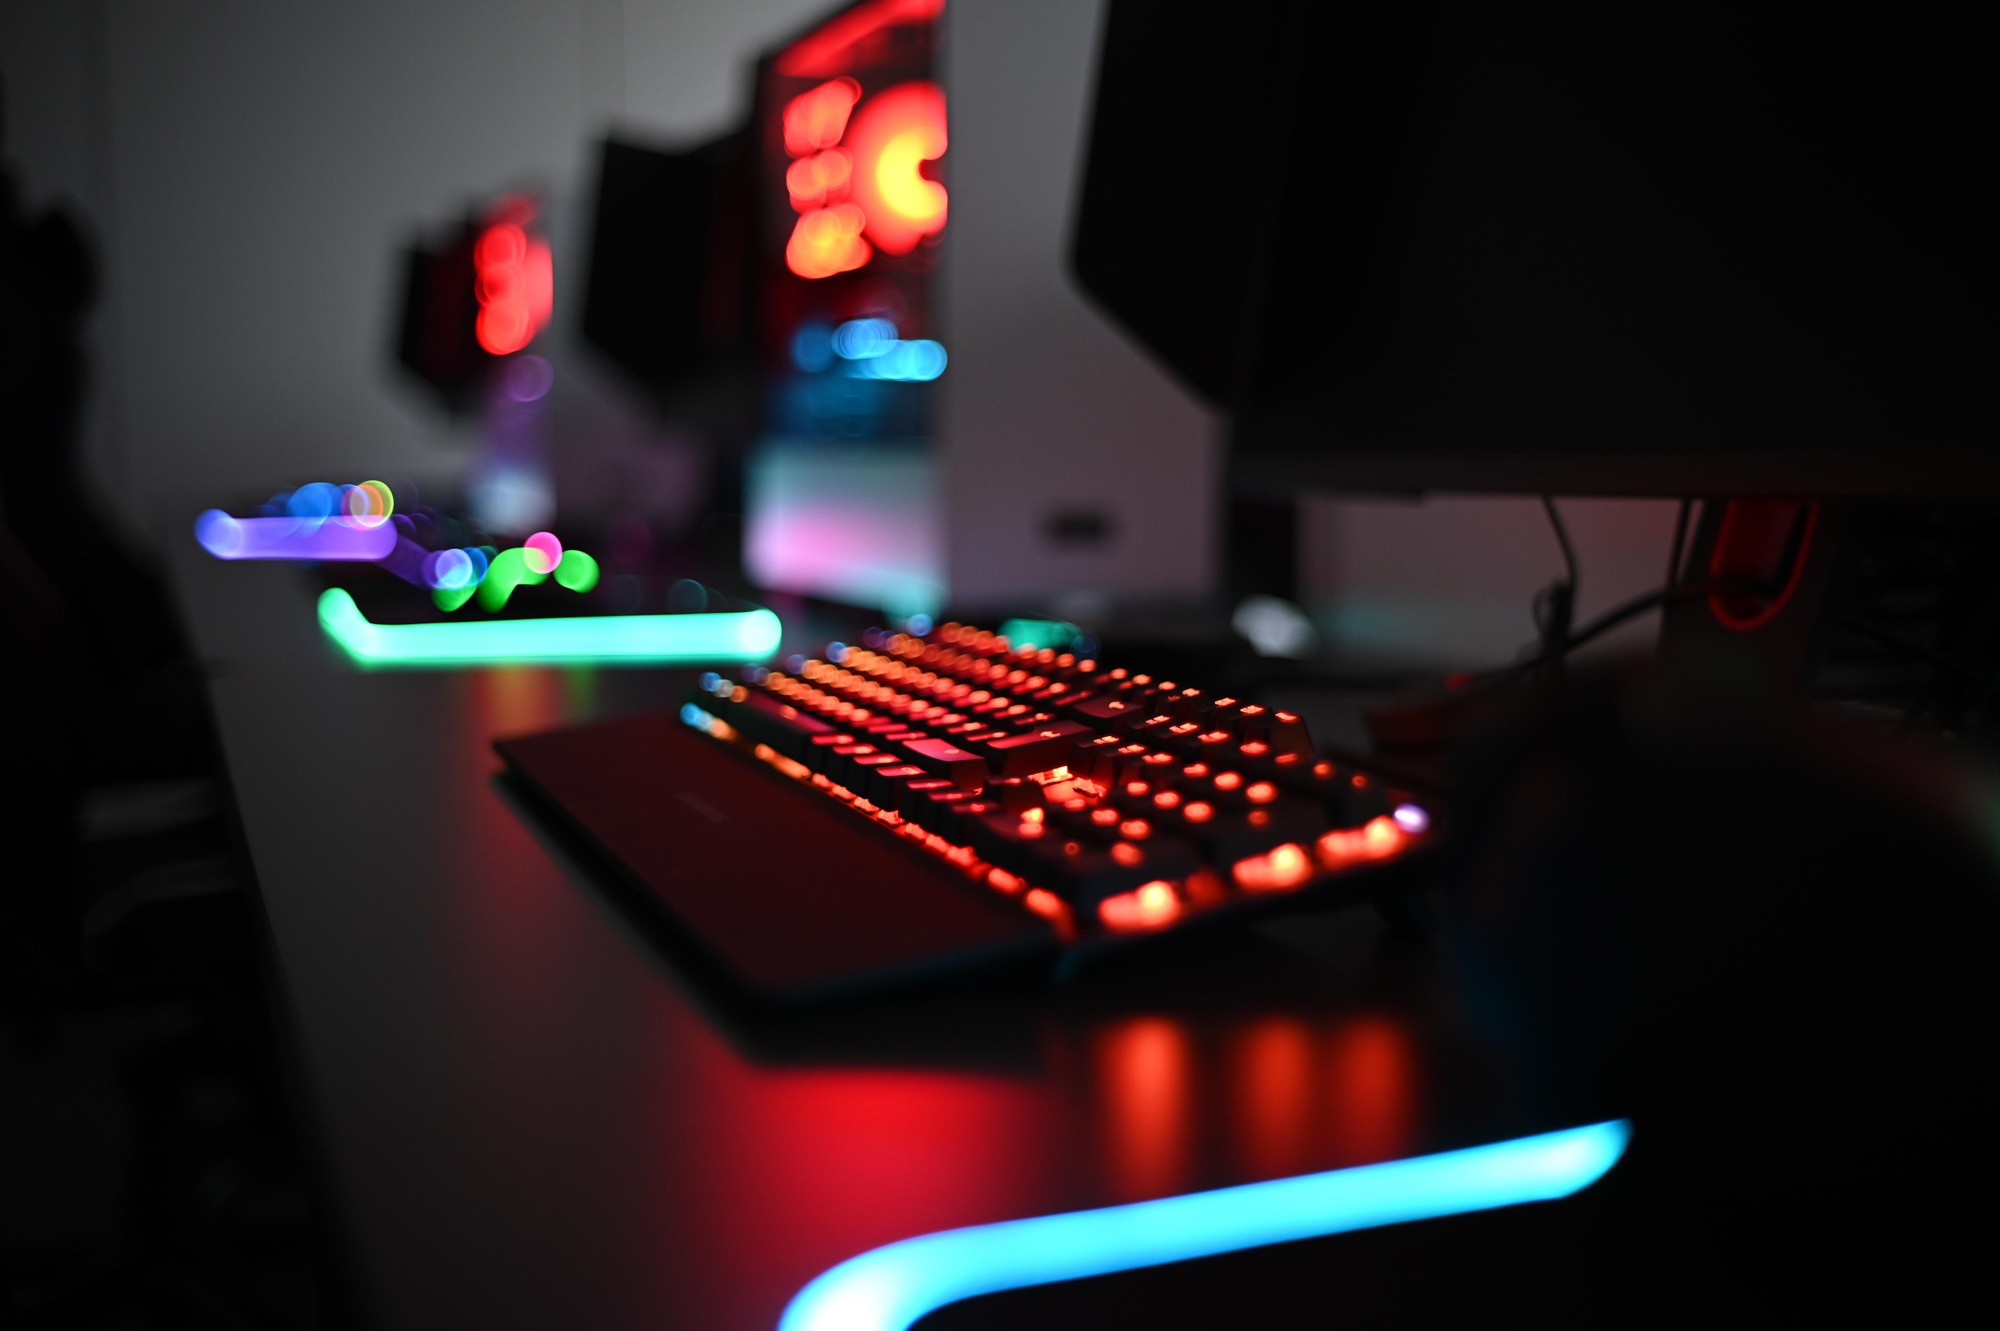 5 Tips For Choosing and Maintaining a Gaming Keyboard